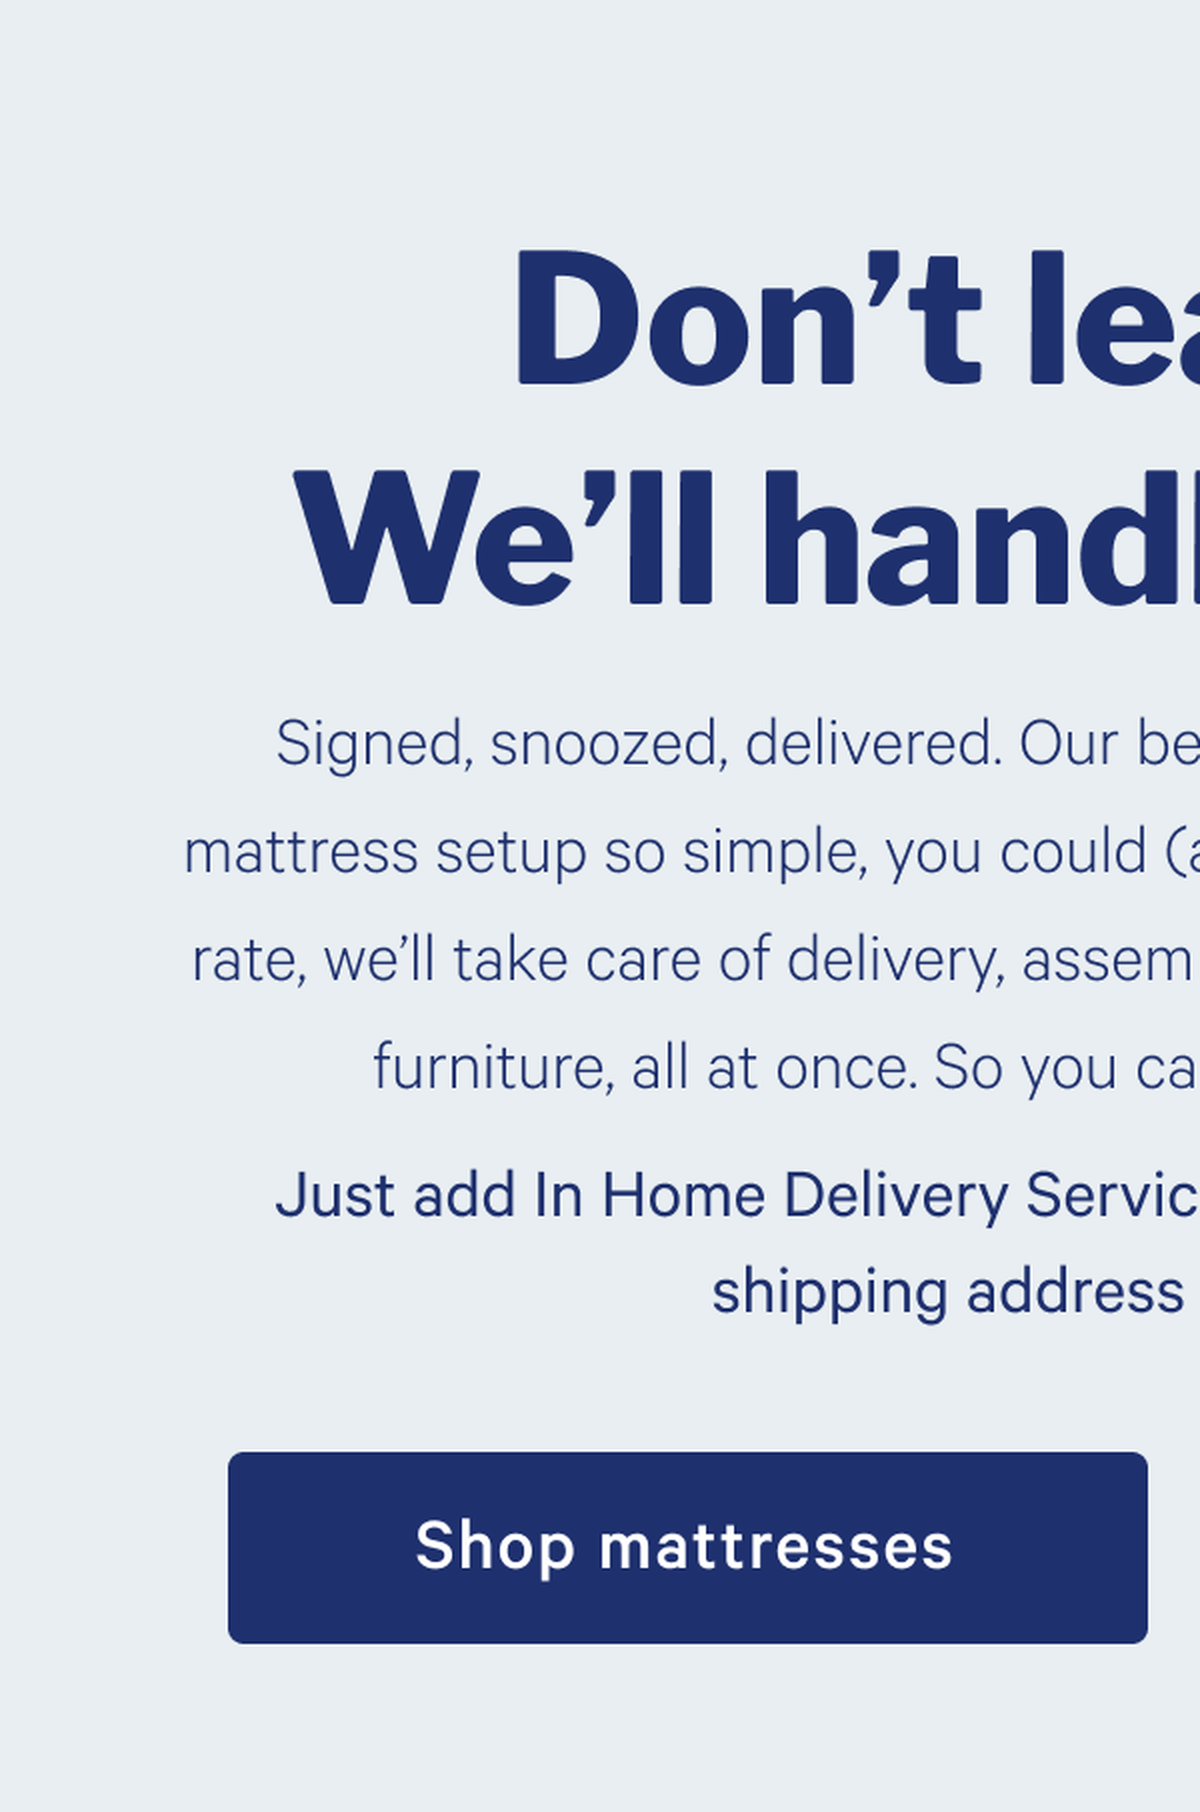 Don't leave bed. We'll handle the rest. >> Signed, snoozed, delivered. Our best In Home Delivery Service makes mattress setup so simple, you could (almost) do it in your sleep. For one flat rate, we’ll take care of delivery, assembly, and removal of packaging and old furniture, all at once. So you can get back to bed even sooner. >> Just add In Home Delivery Service at checkout after entering your shipping address and get snoozing. >> Shop mattresses >> 